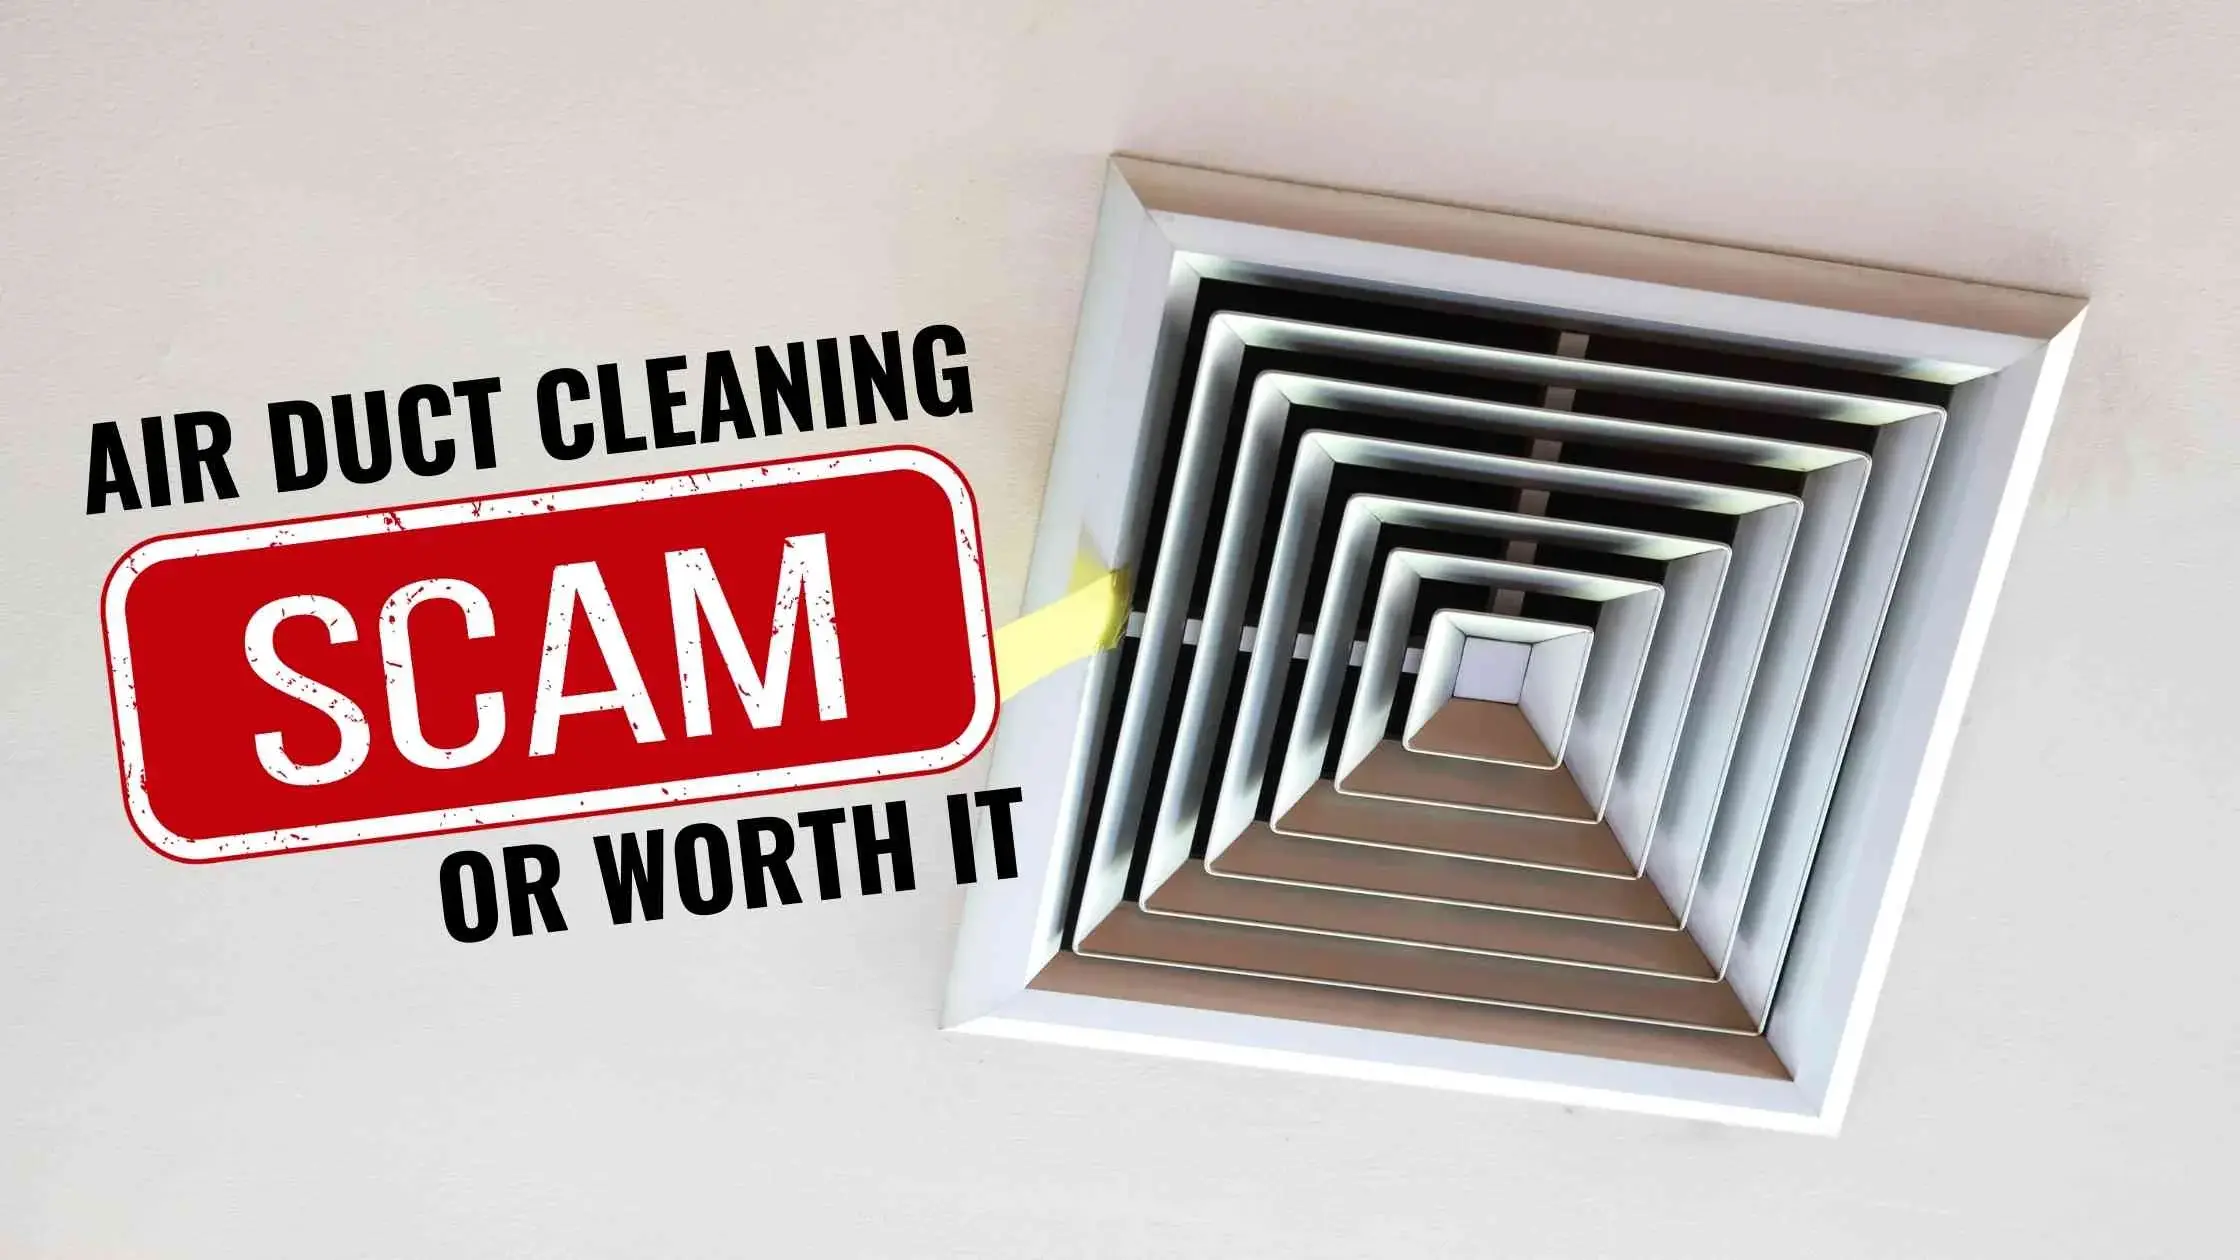 Air Duct Cleaning: Scam or Worth it? Know the Facts